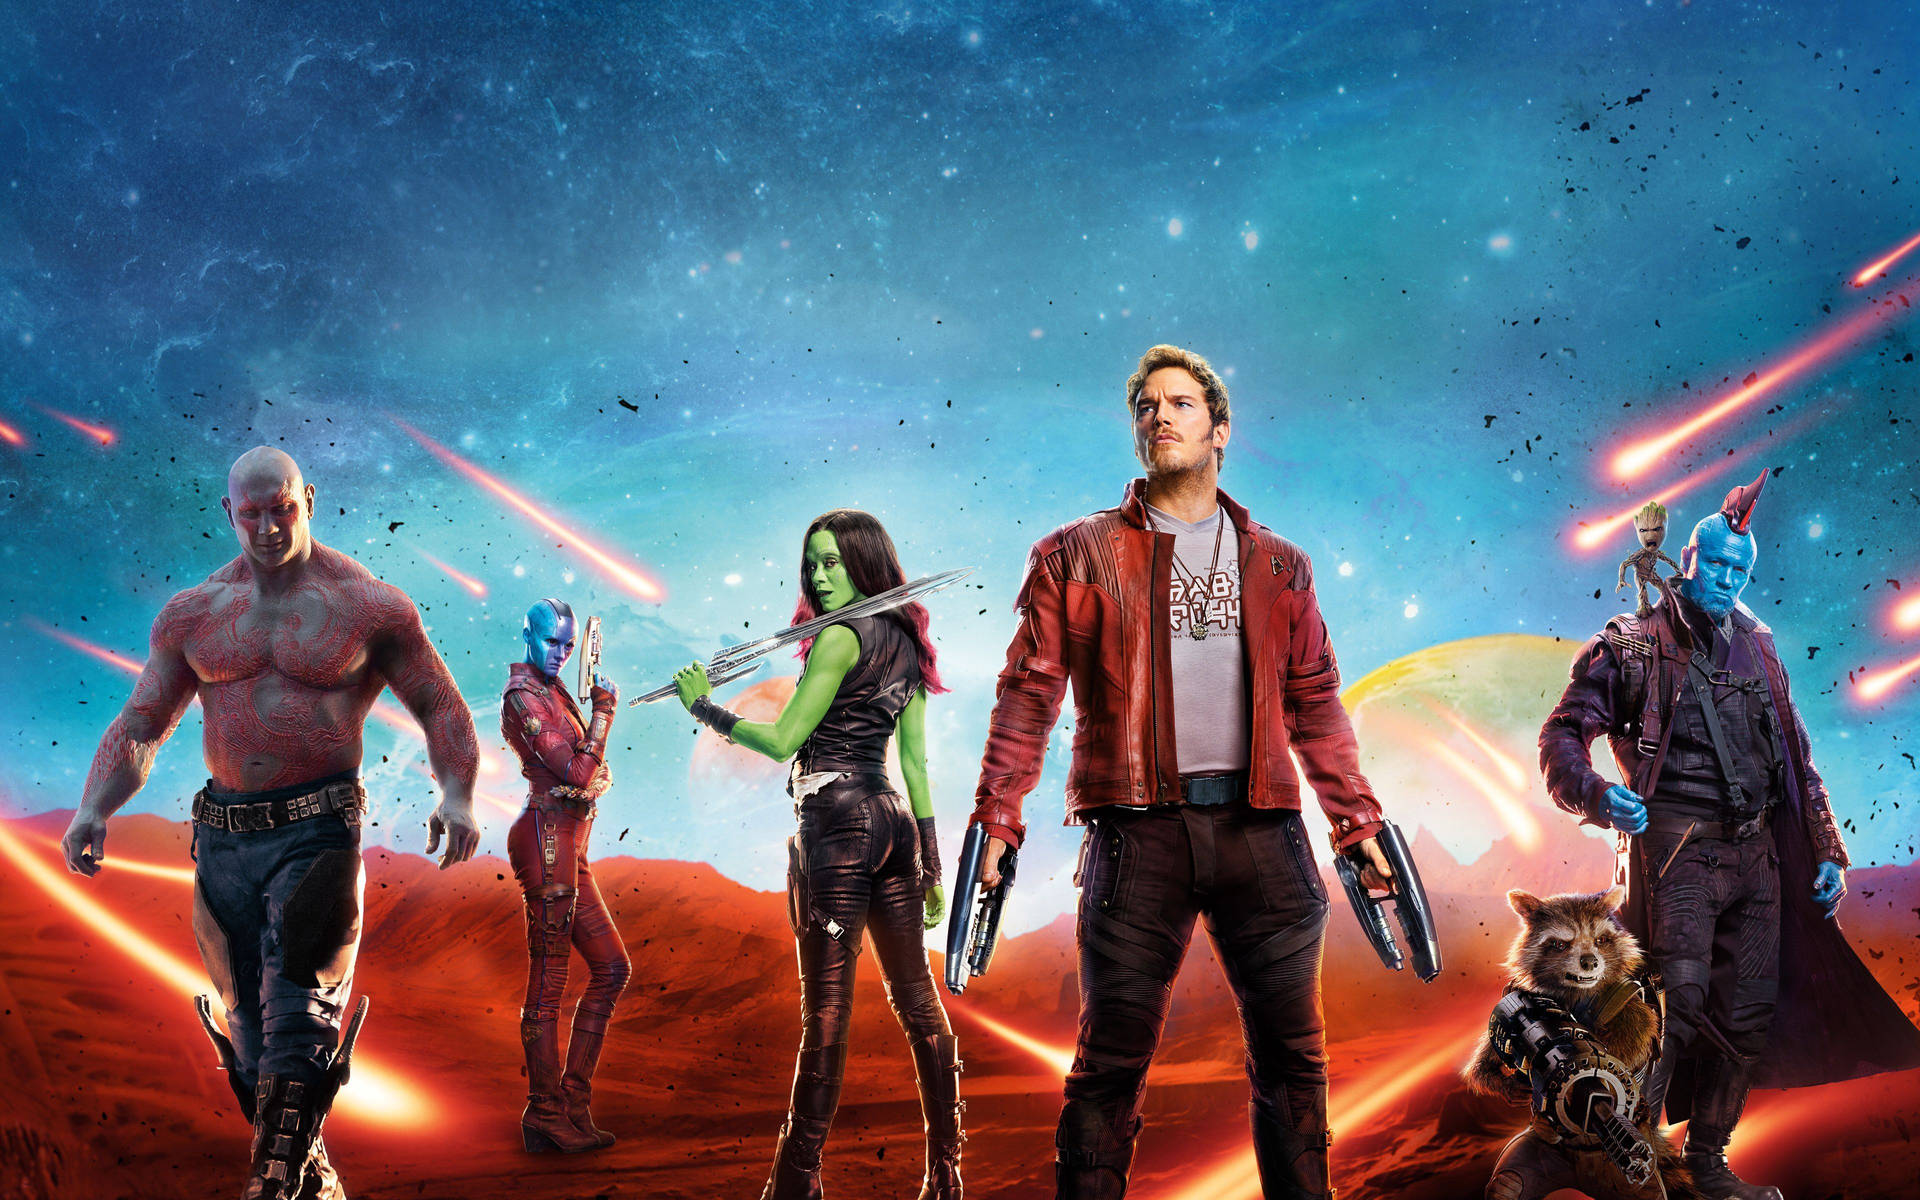 "Four Guardians Protecting the Galaxy" Wallpaper